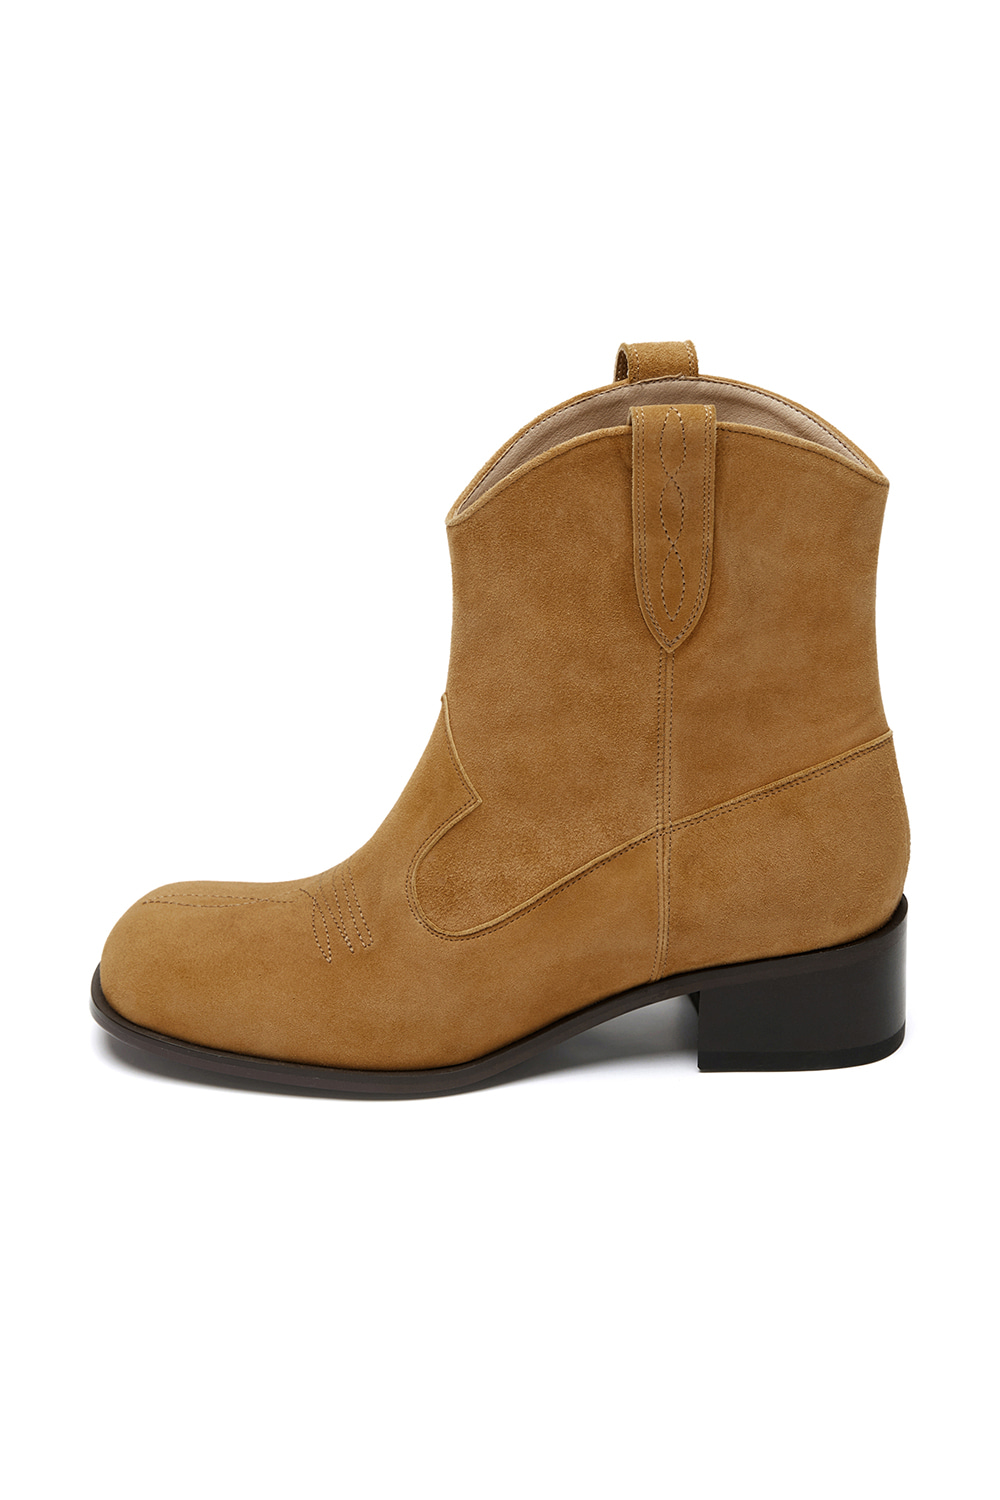 WESTERN ROUND SQUARE TOE MIDDLE BOOTS [CAMEL]		